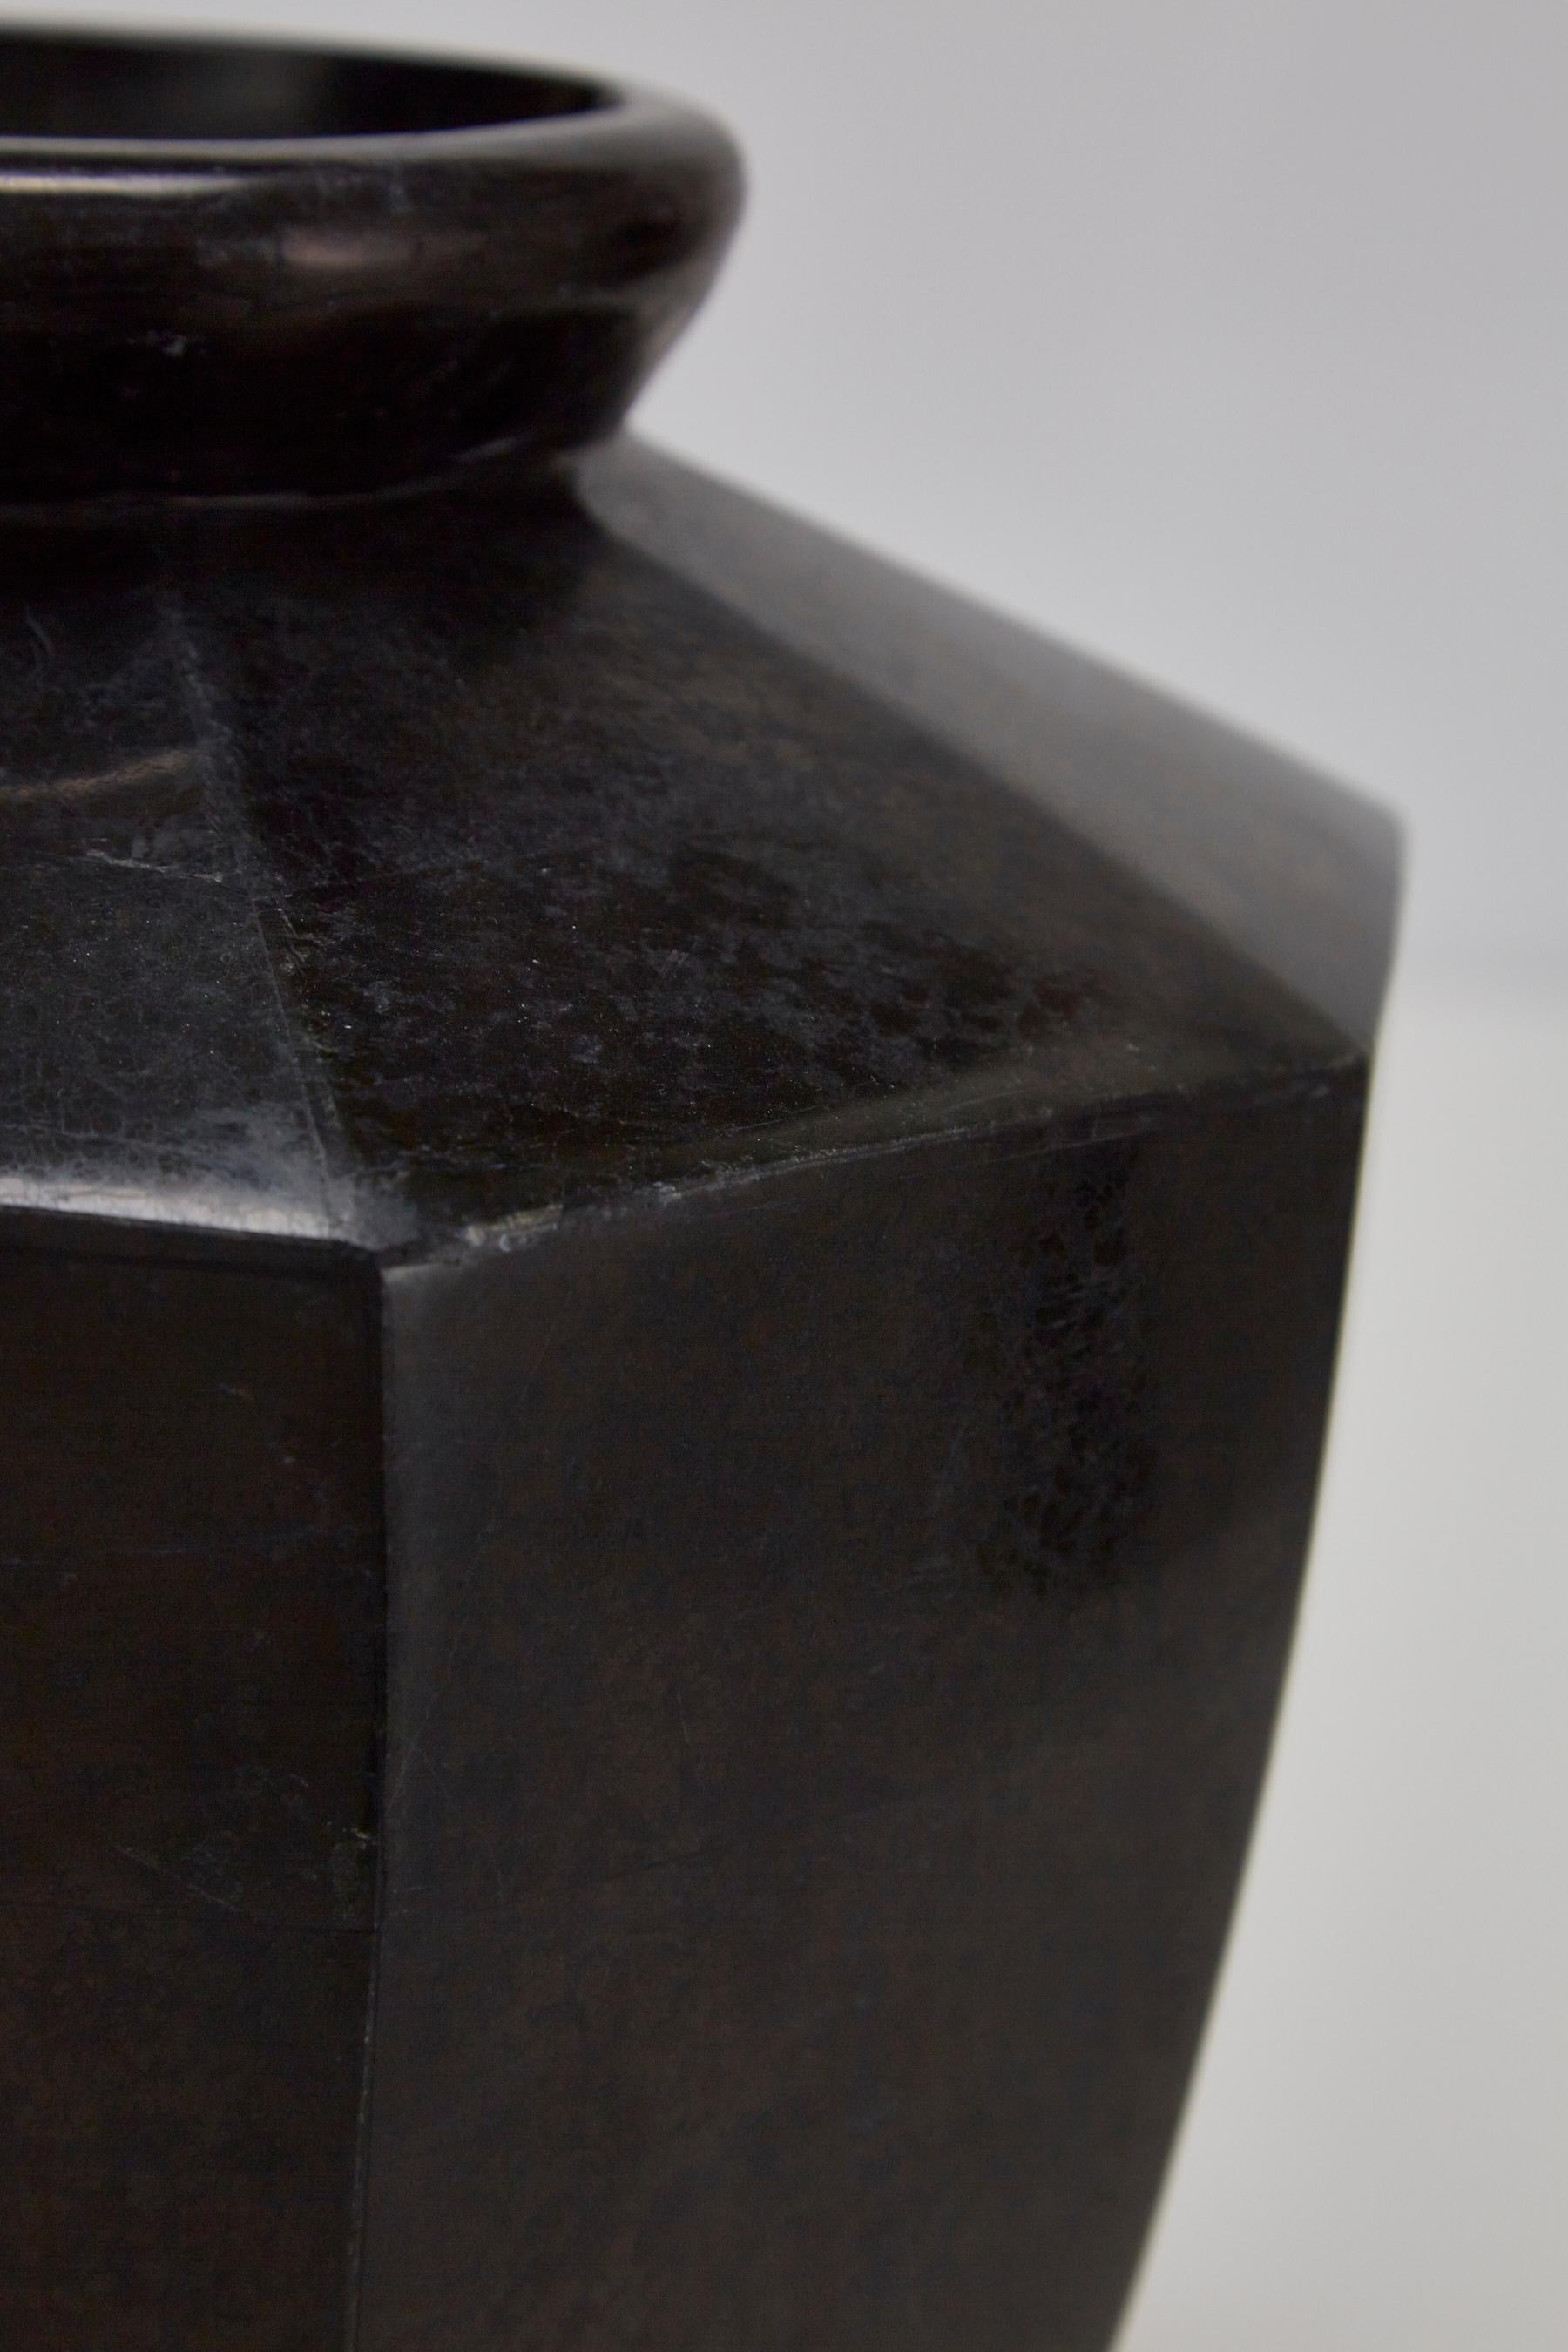 Short Octagonal Vase in Tessellated Black Stone, 1990s For Sale 3